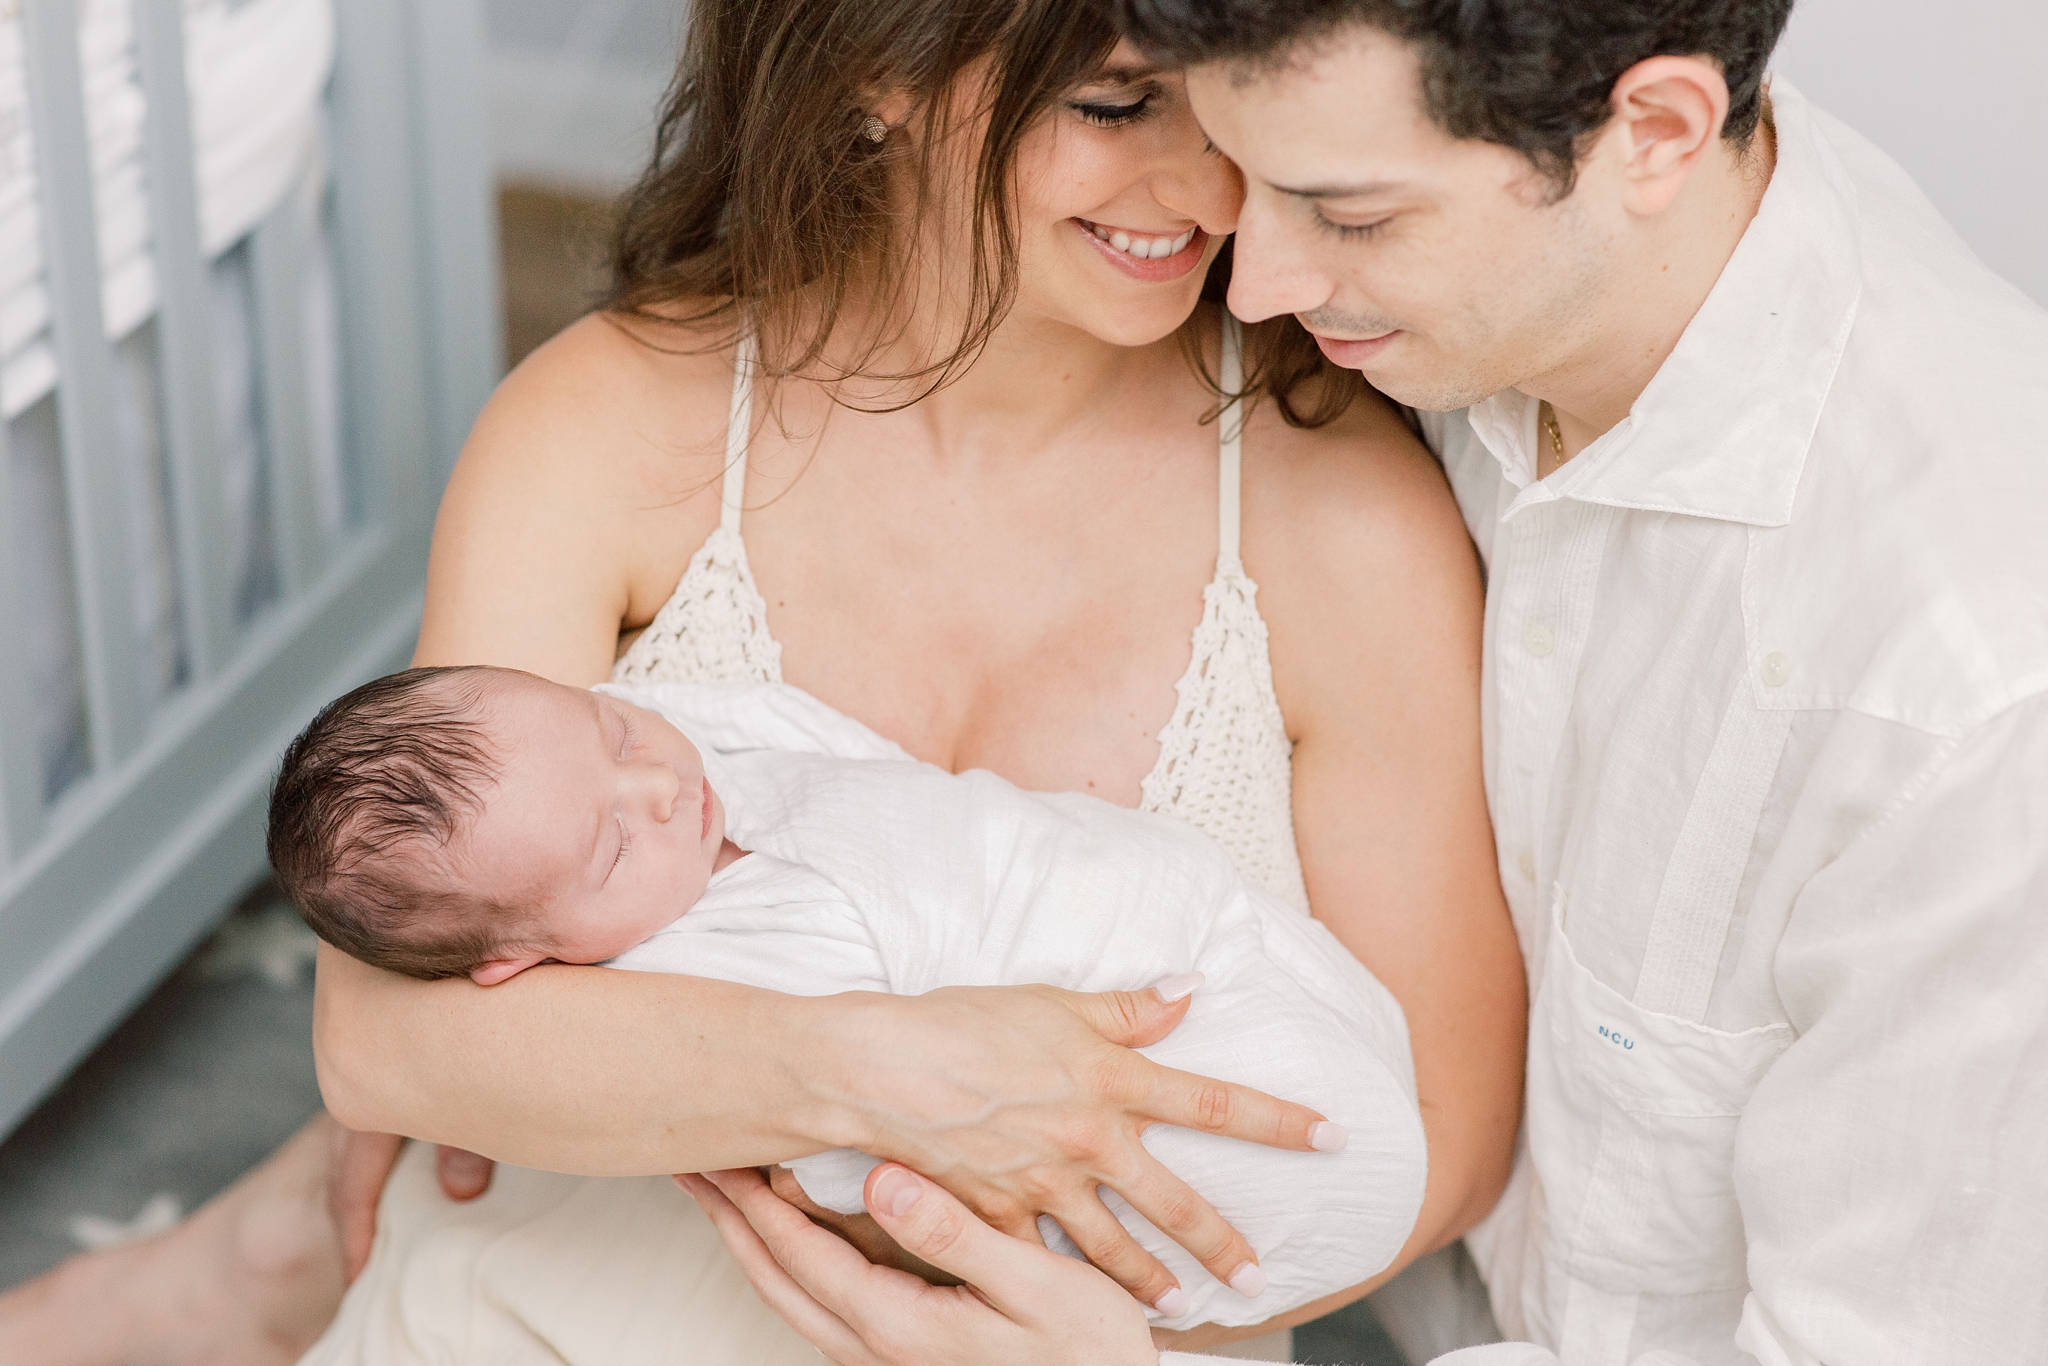 A lifestyle newborn session photographed by Washington, DC photographer, Alicia Lacey.